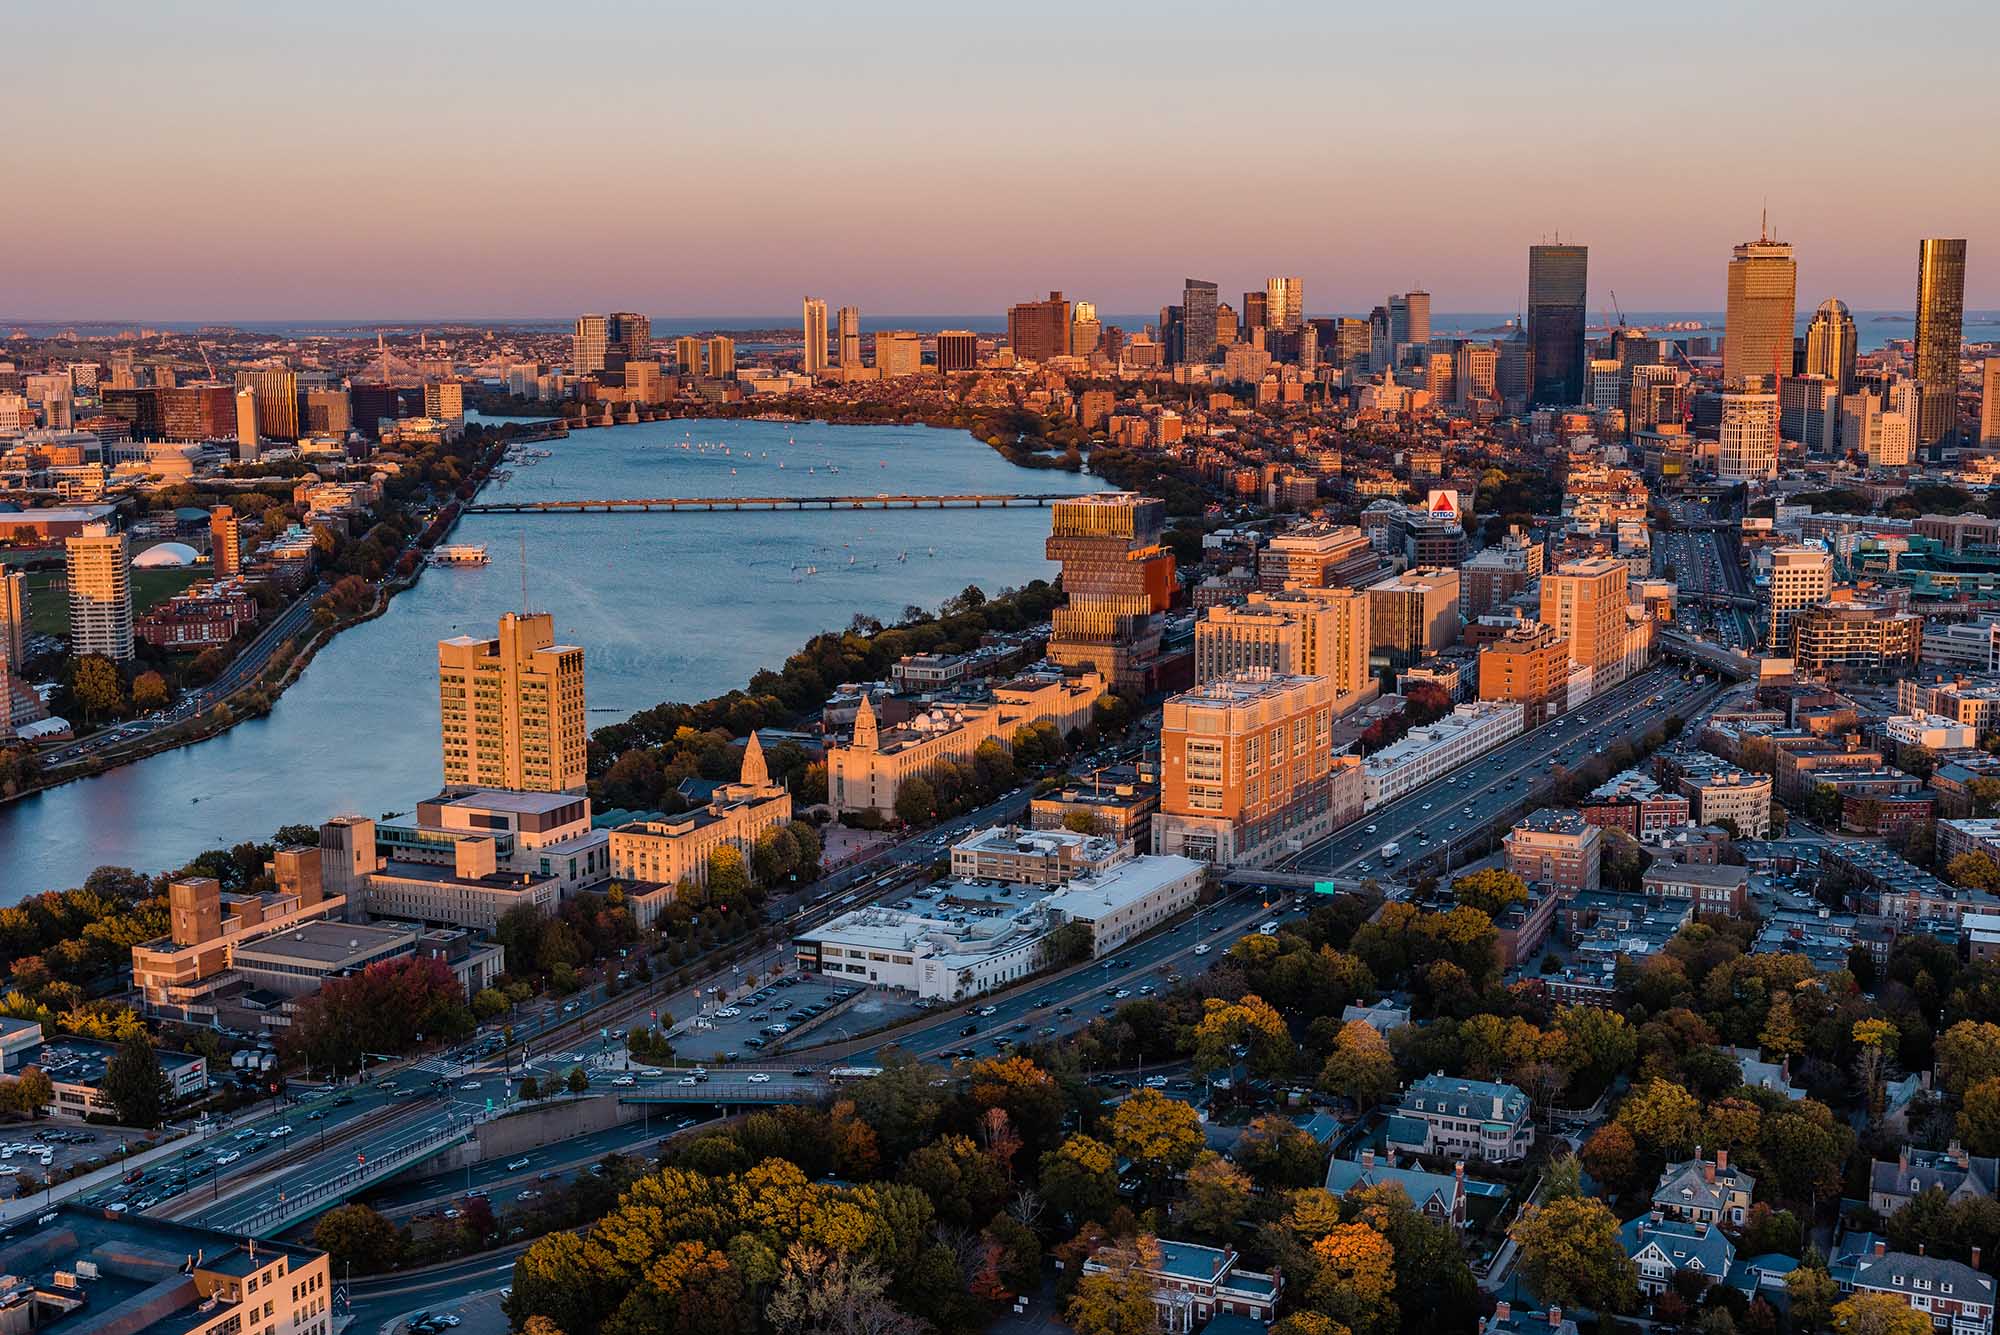 Aerial shot of Boston University's campus during sunset. An orange glow is shown on the large campus highlighting campus buildings like Kilachand.